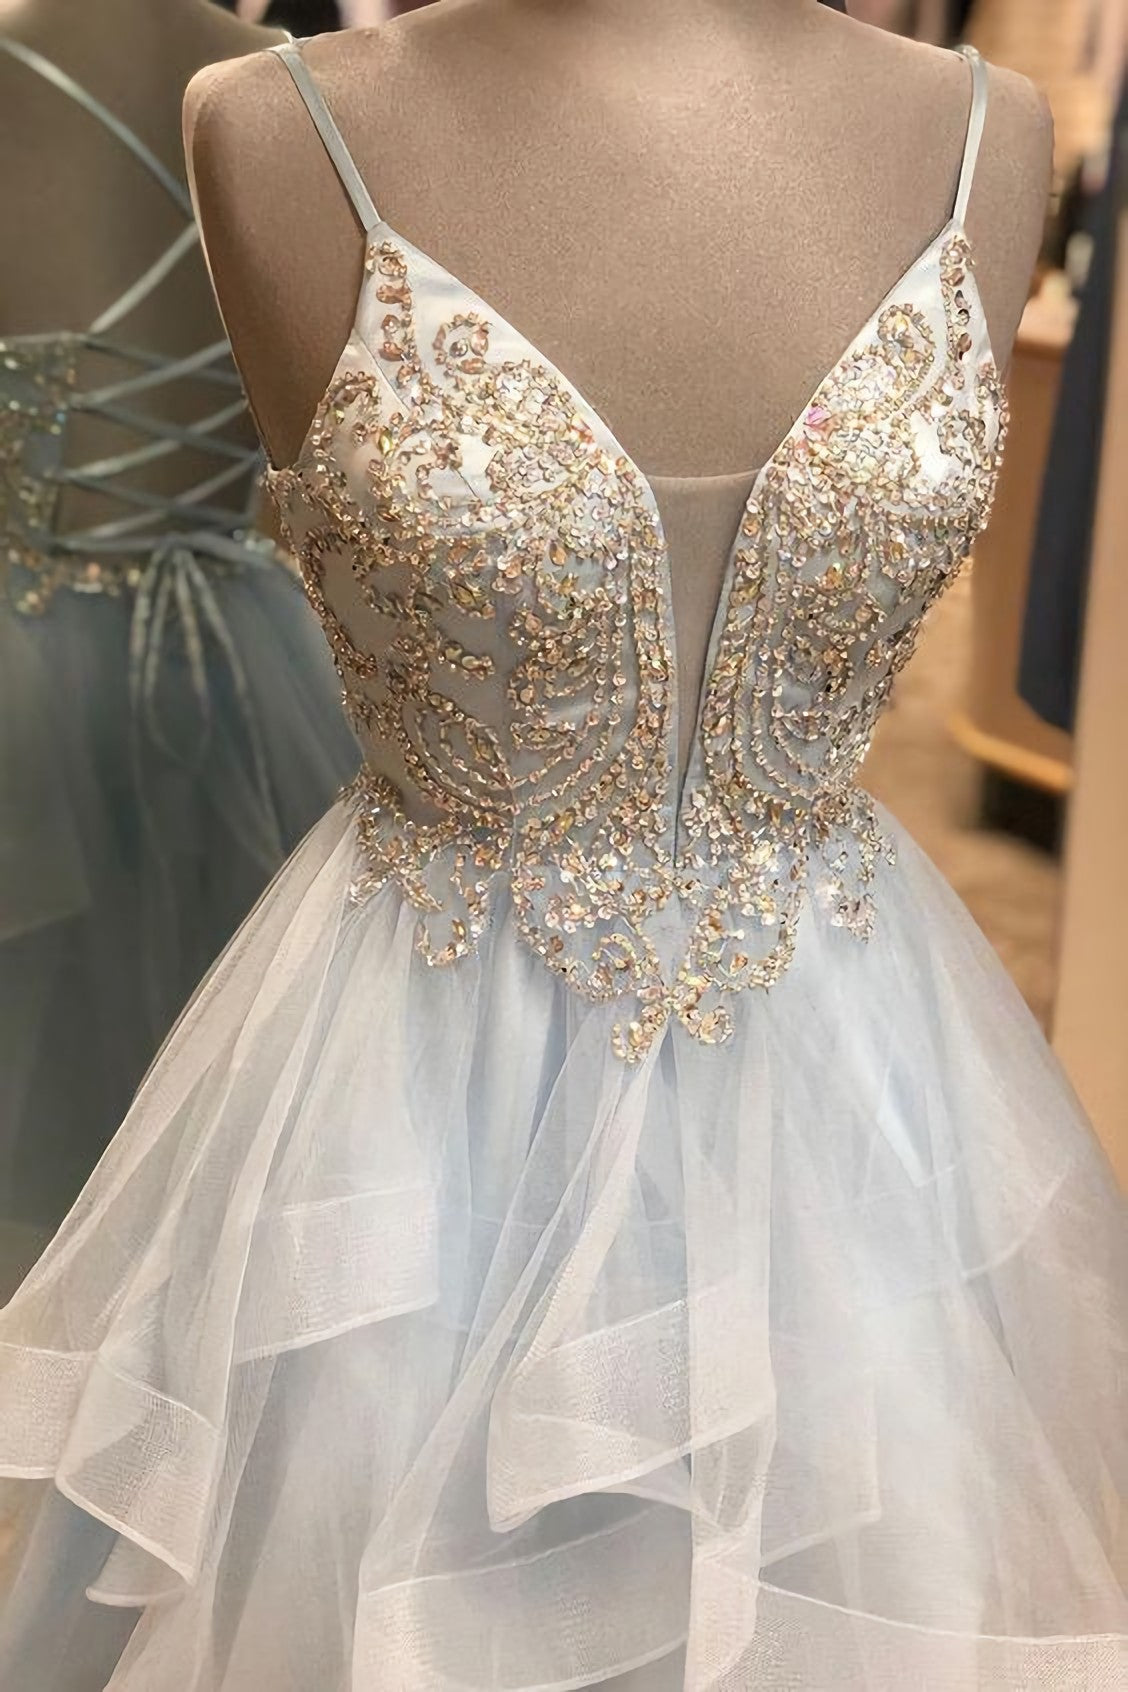 Homecoming Dresses, A Line Spaghetti Straps Light Sky Blue Short Homecoming Dress, With Beading